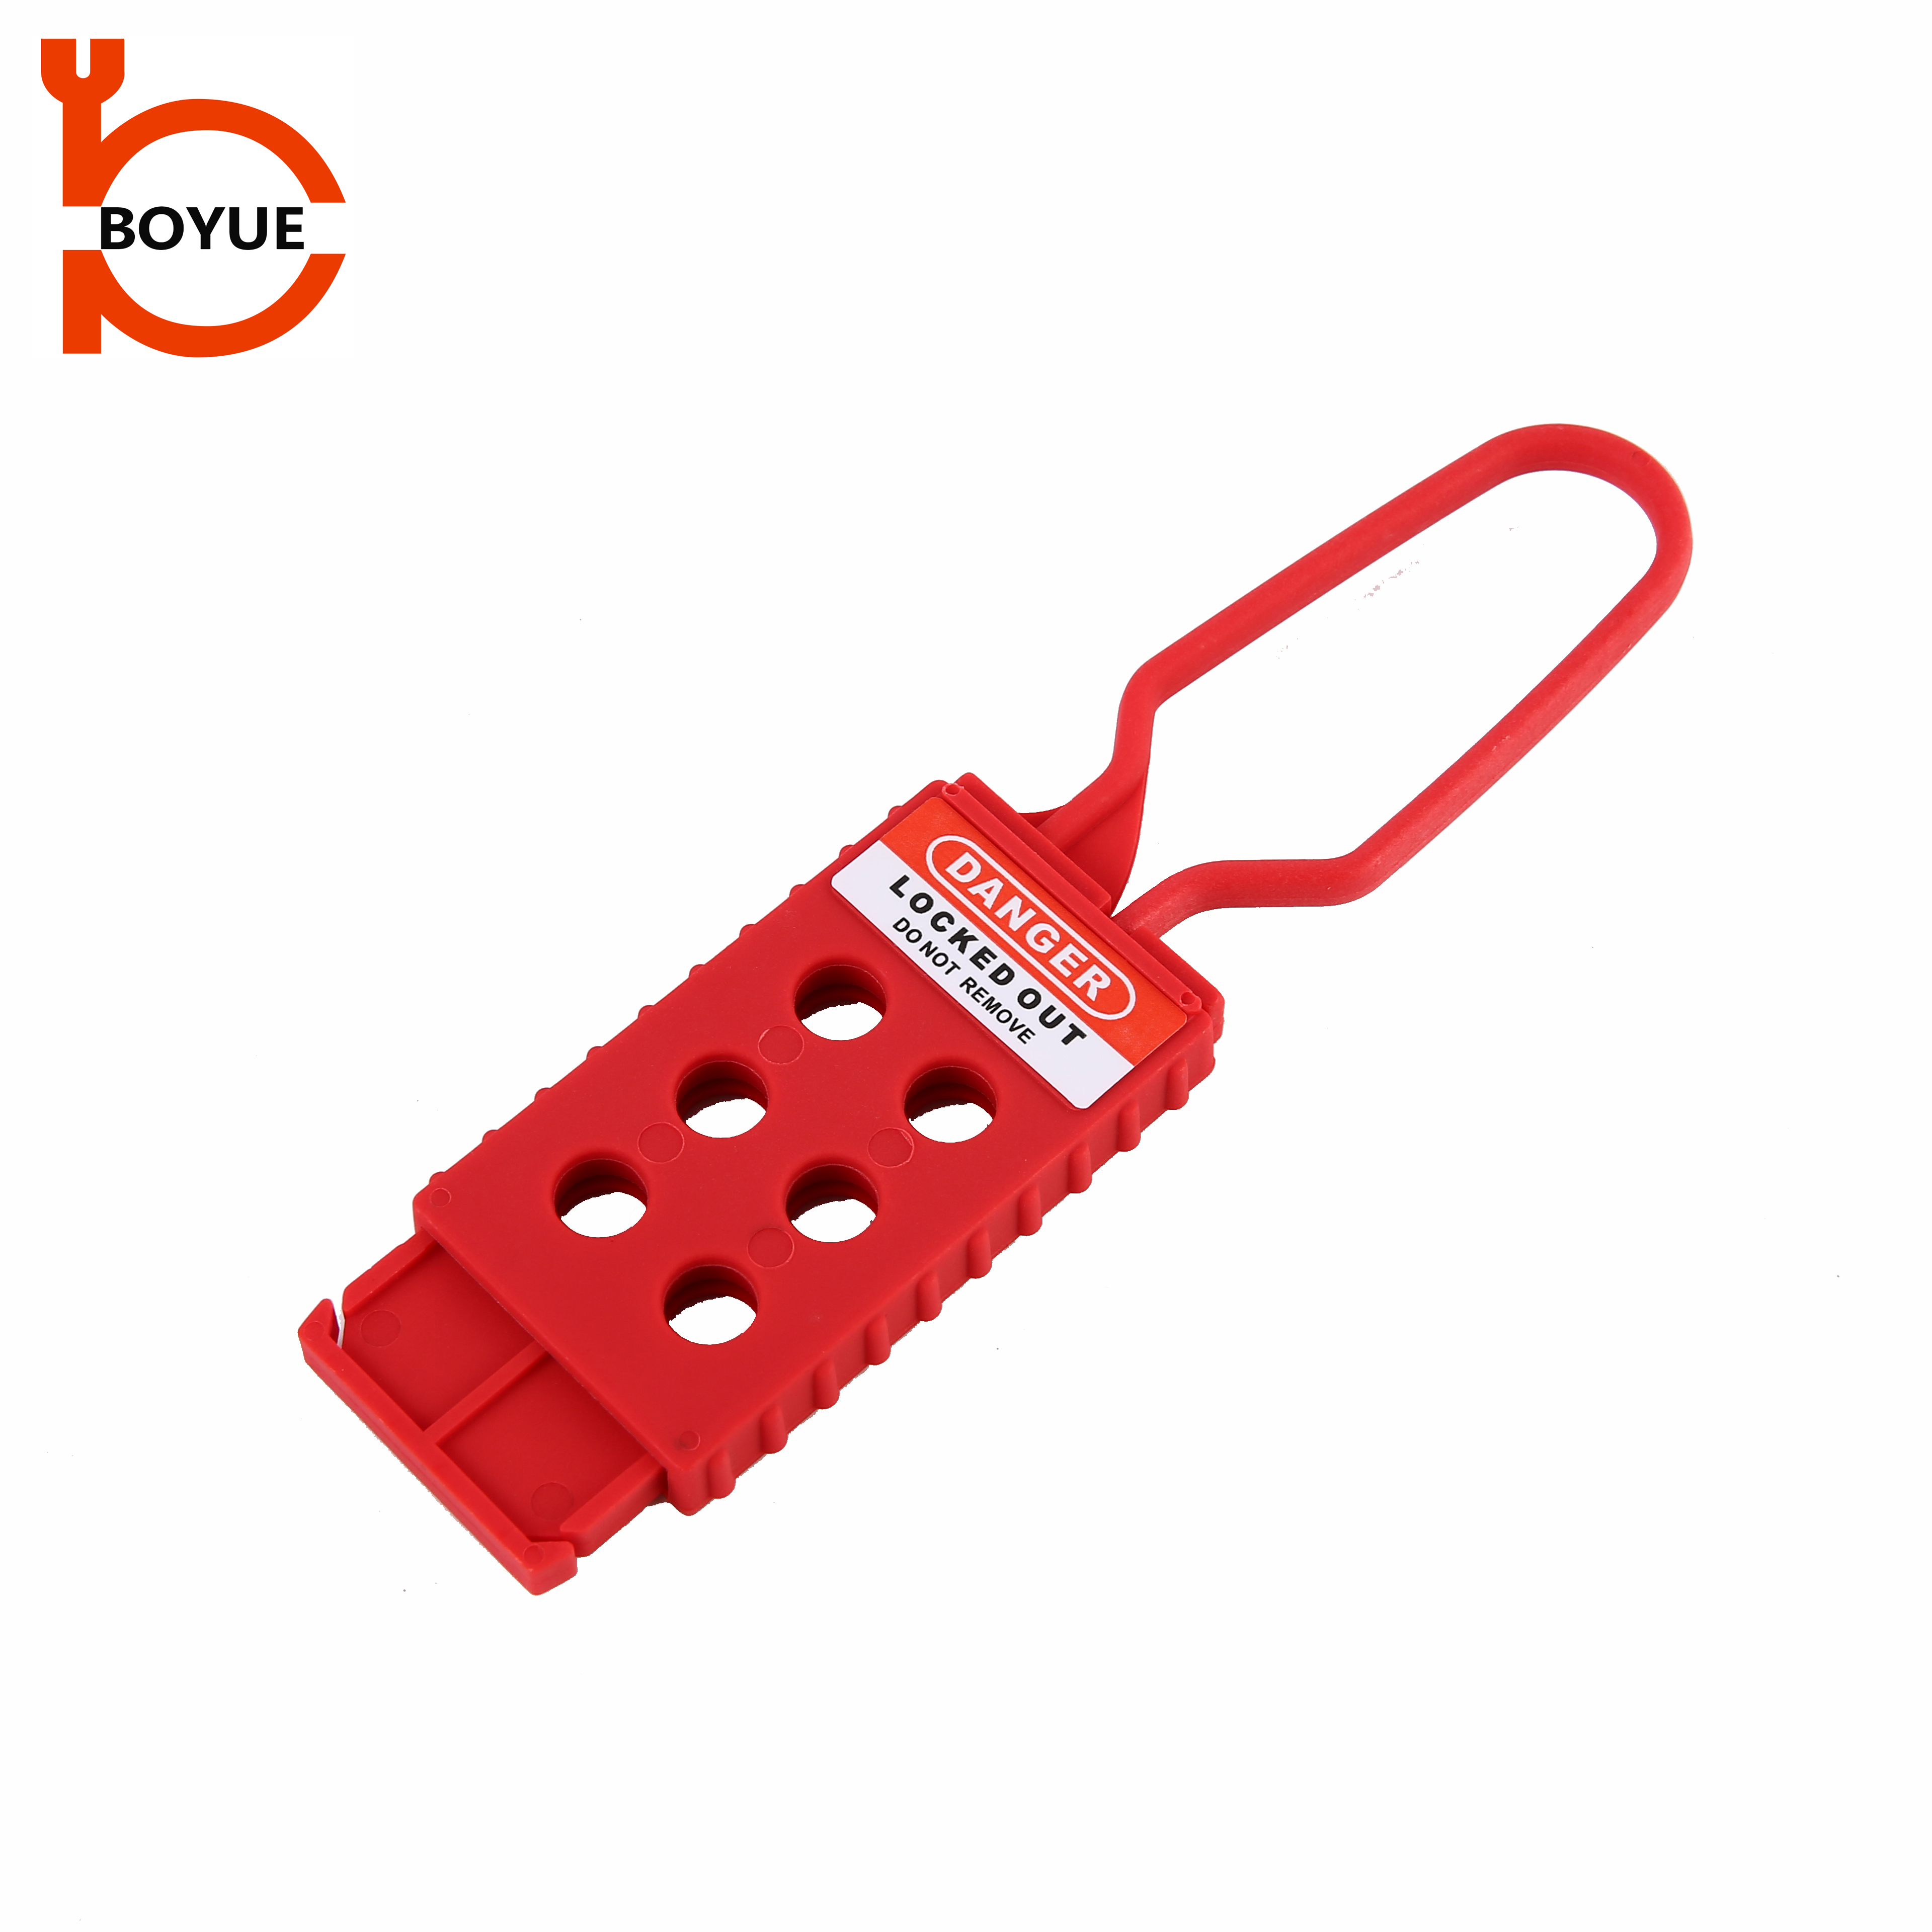 Babban Insulated Shackle Nylon Lockout Tagout Hasp Kulle HN-01